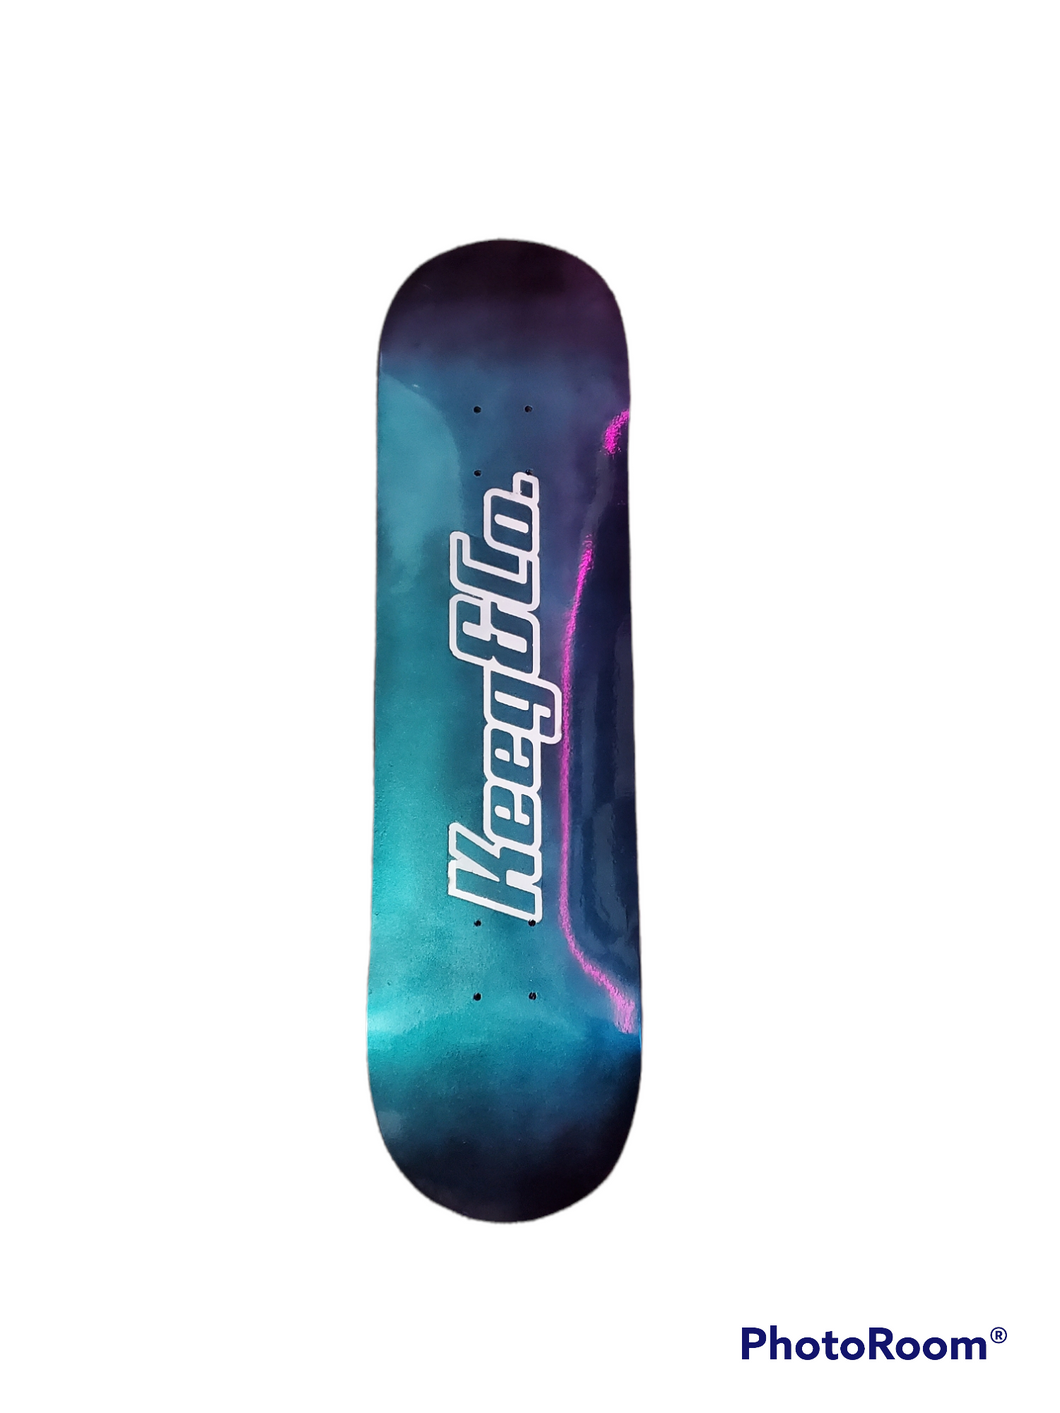 Colorshift deck with Glow Logo